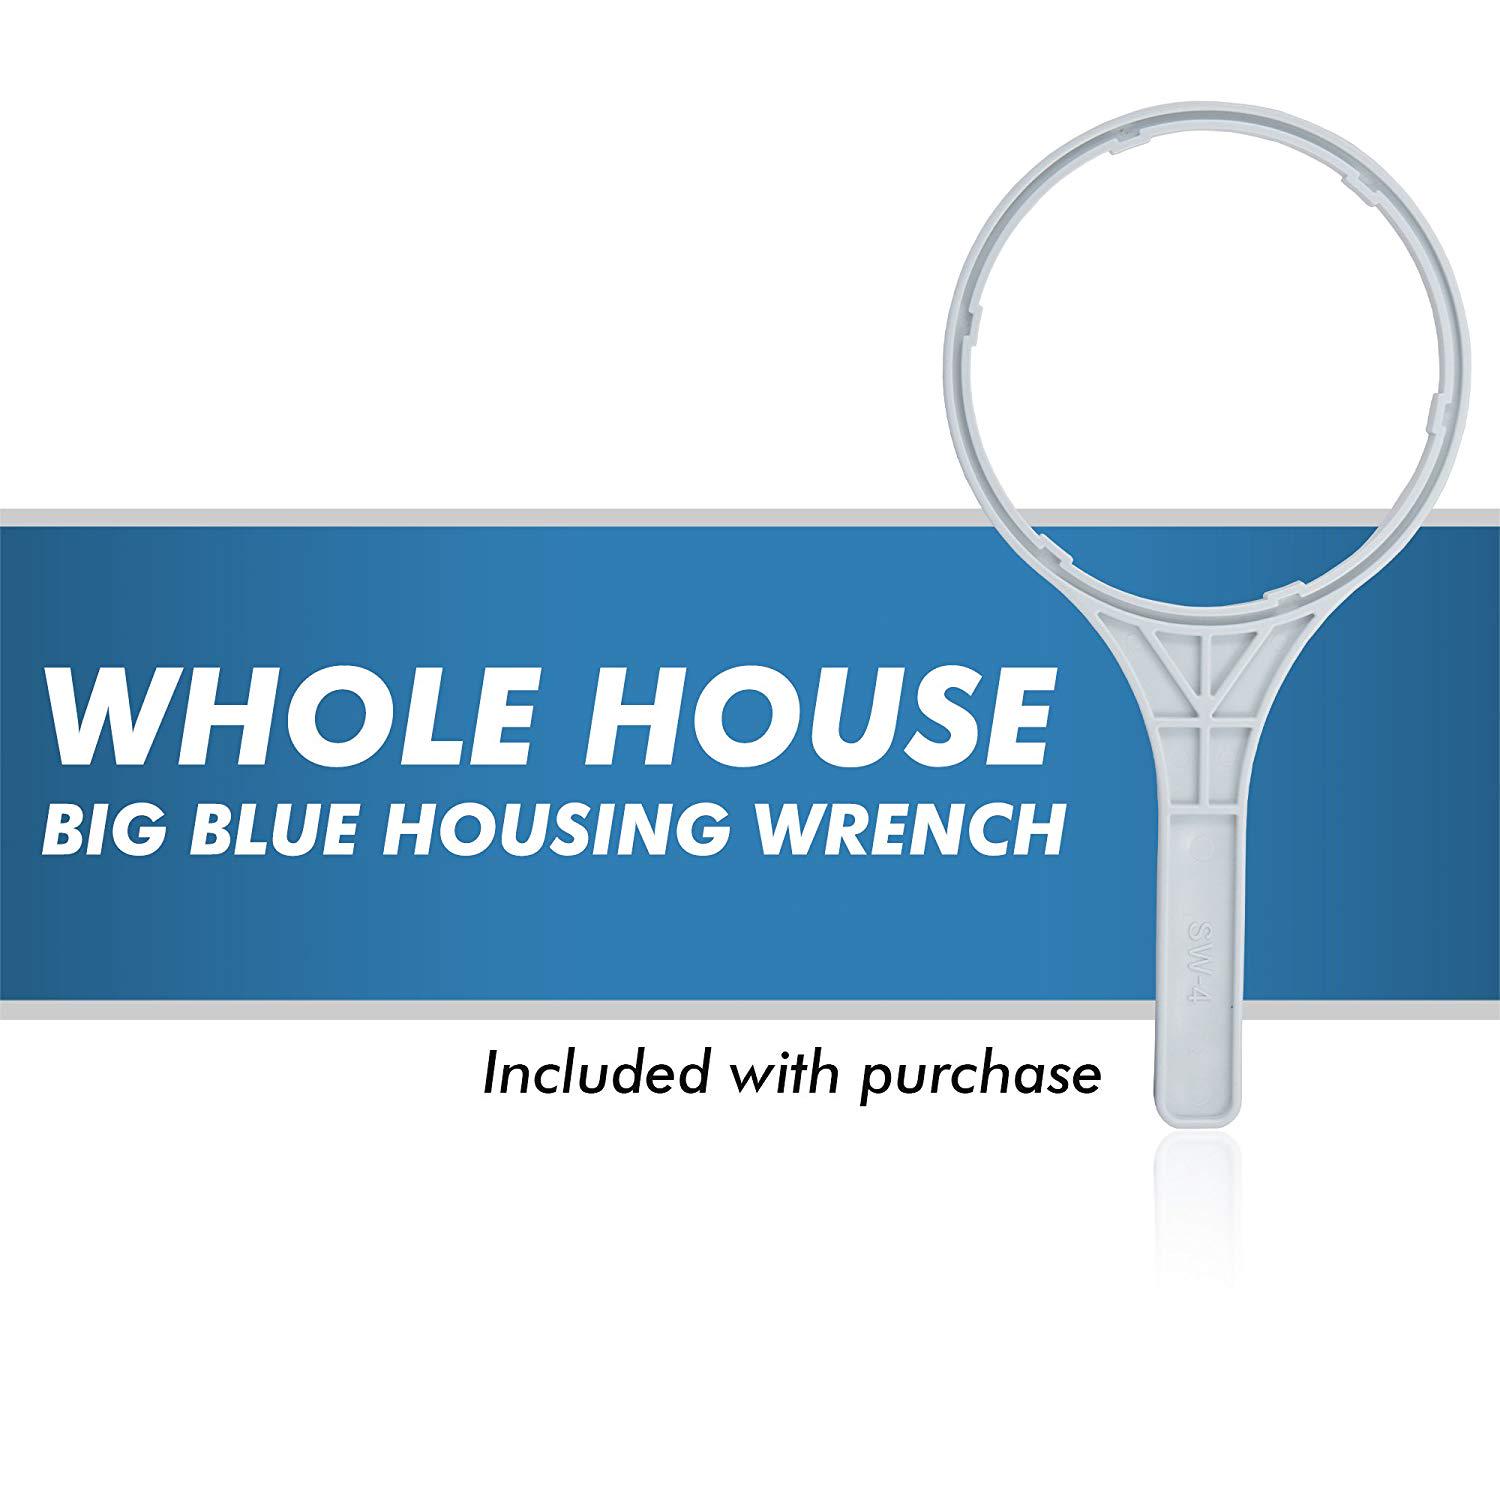 APEC Whole House 1-Stage Water Filtration System Reusable and Washable Pleated Sediment For All Purpose